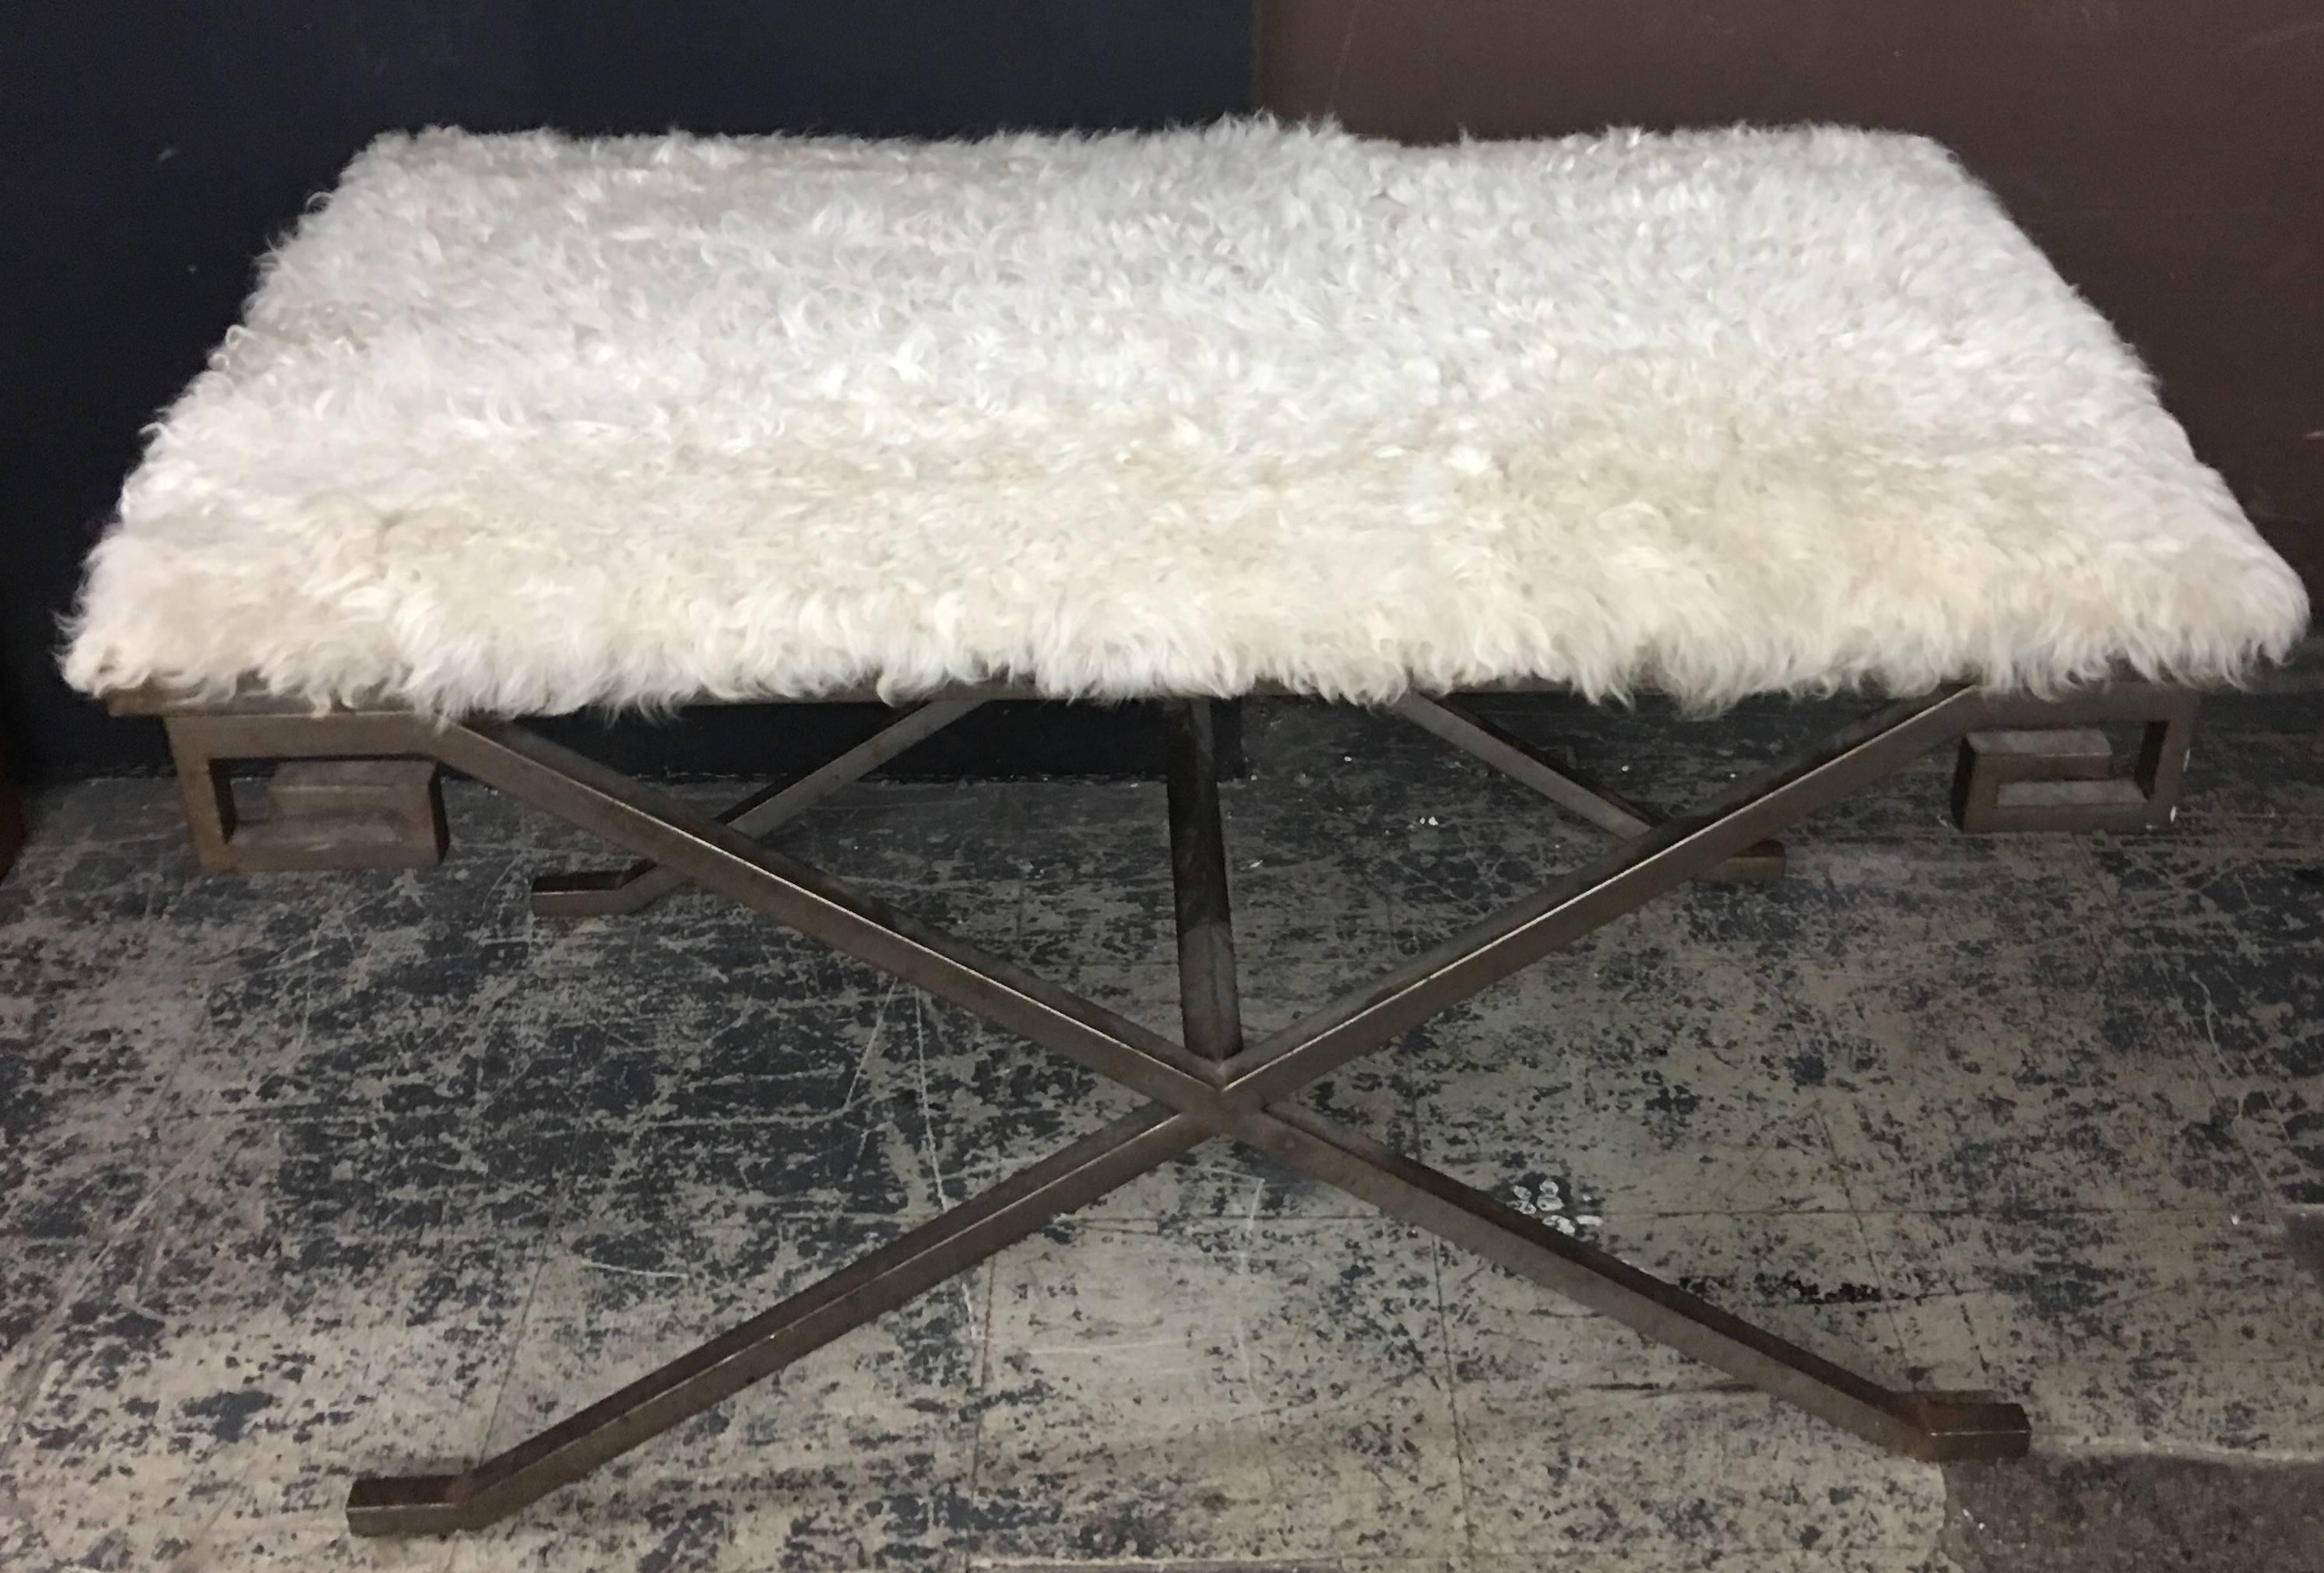 Hollywood Regency style bench with a faux fur seat and Greek key corner detail. The base is patinated steel.